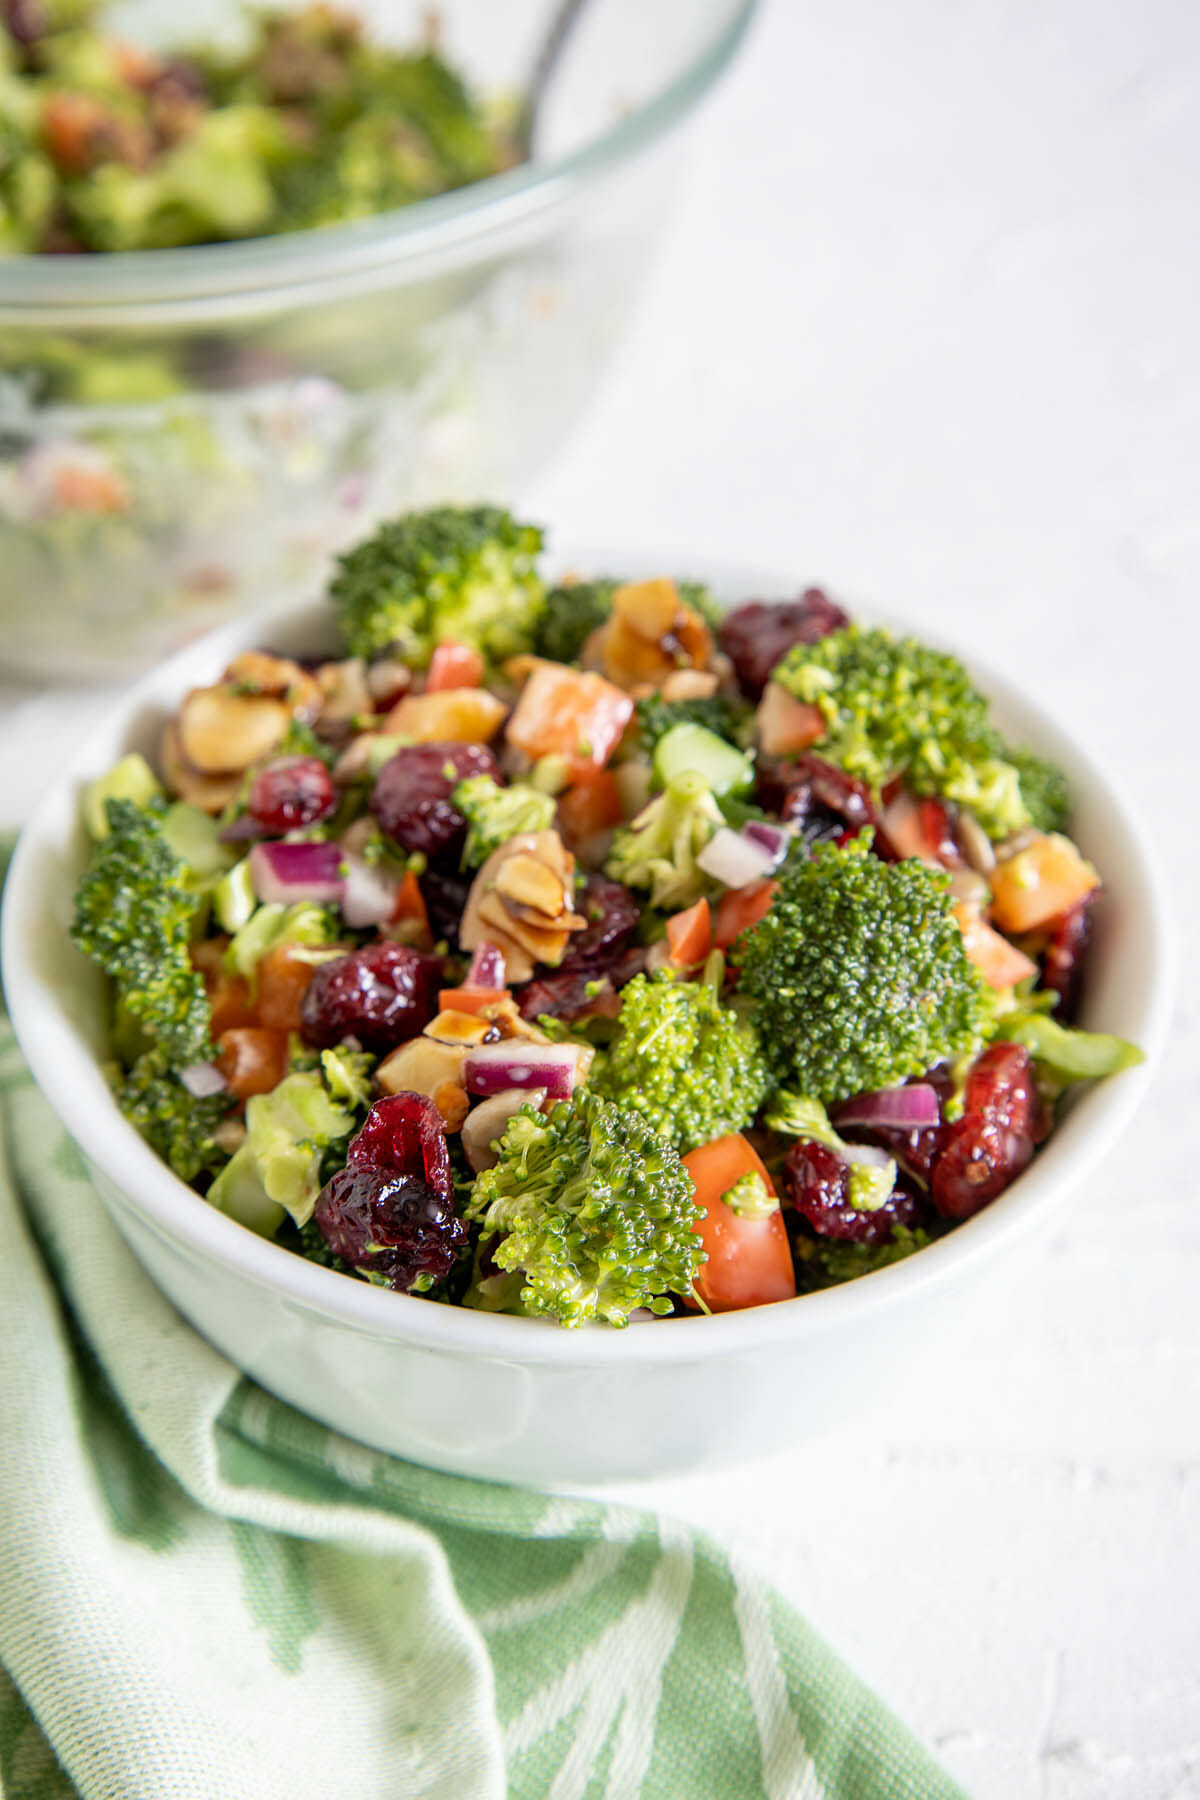 Vegan Broccoli Salad in a bowl with large bowl in background.